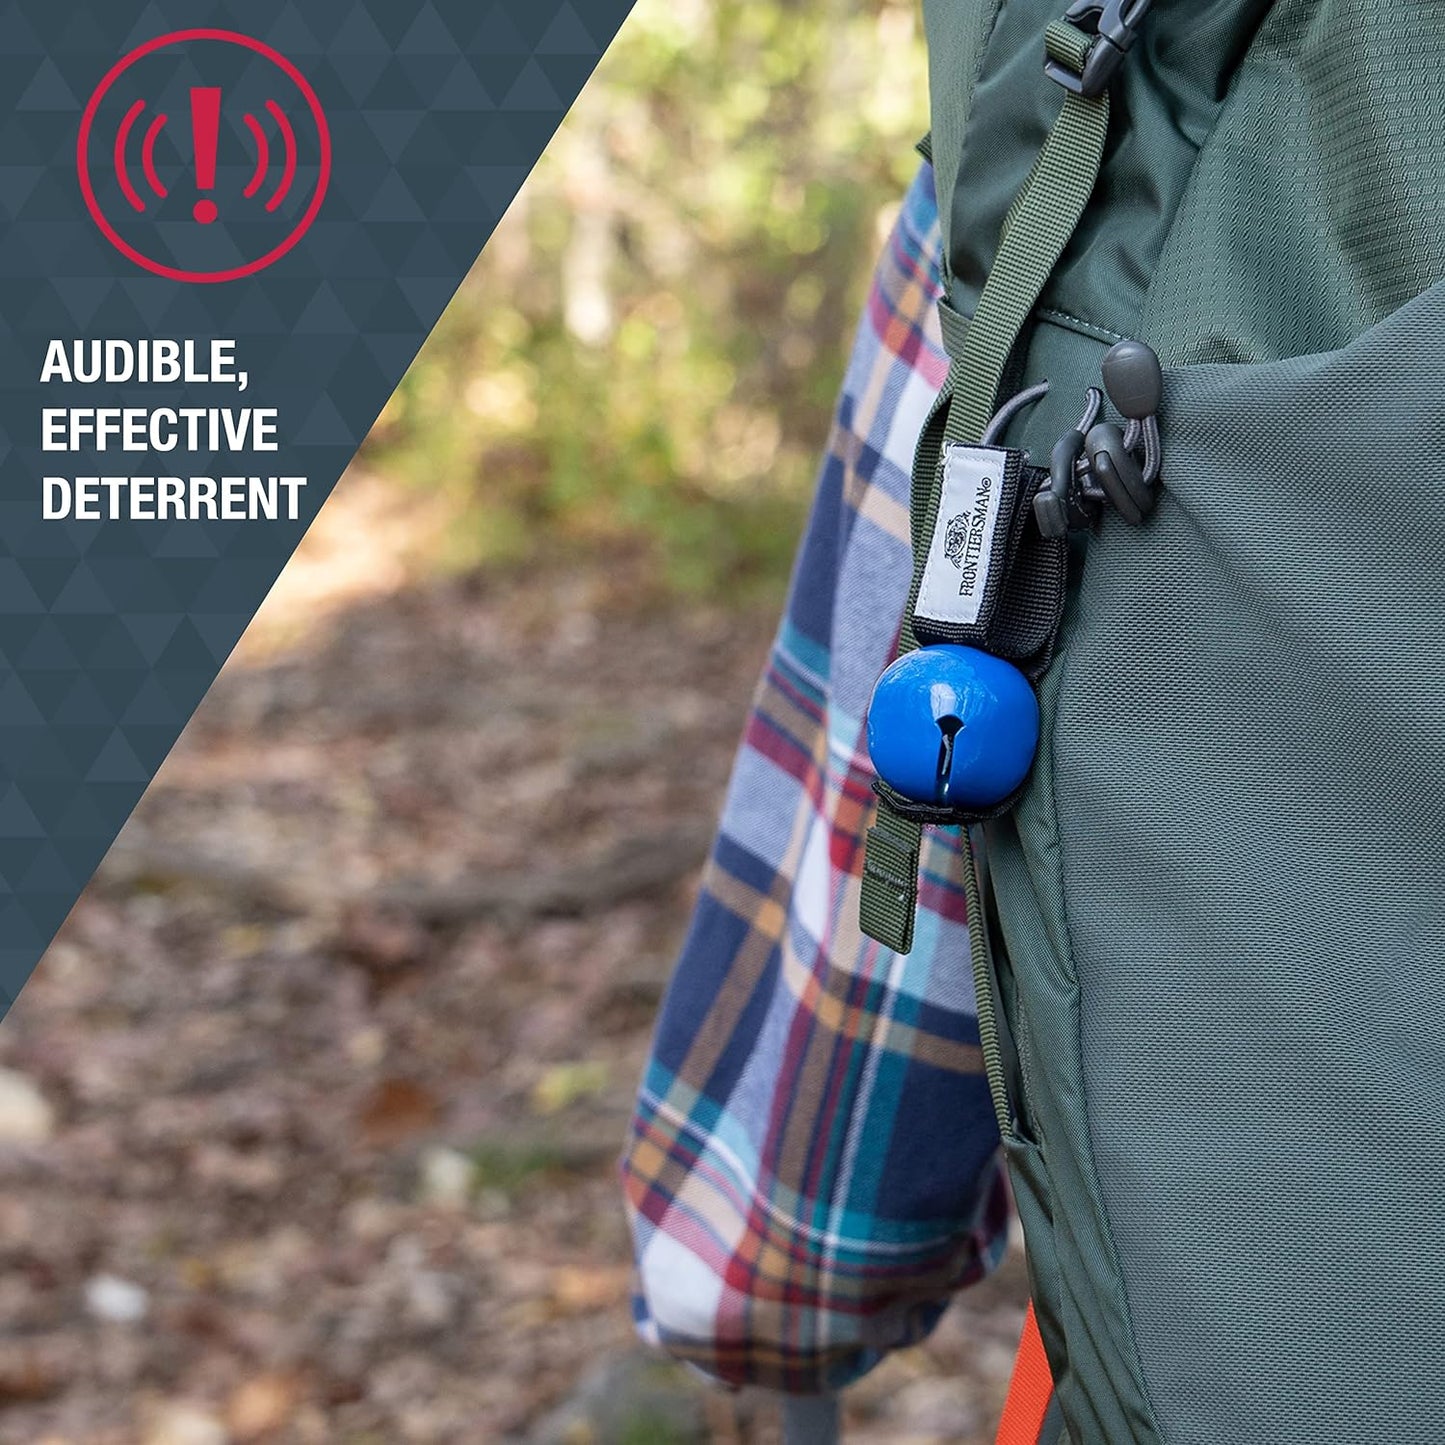 SABRE Frontiersman Bear Bell, Magnetic Silencer, Durable Hook and Loop Strap Attachment, Helps To Prevent Startling Bears While Hiking